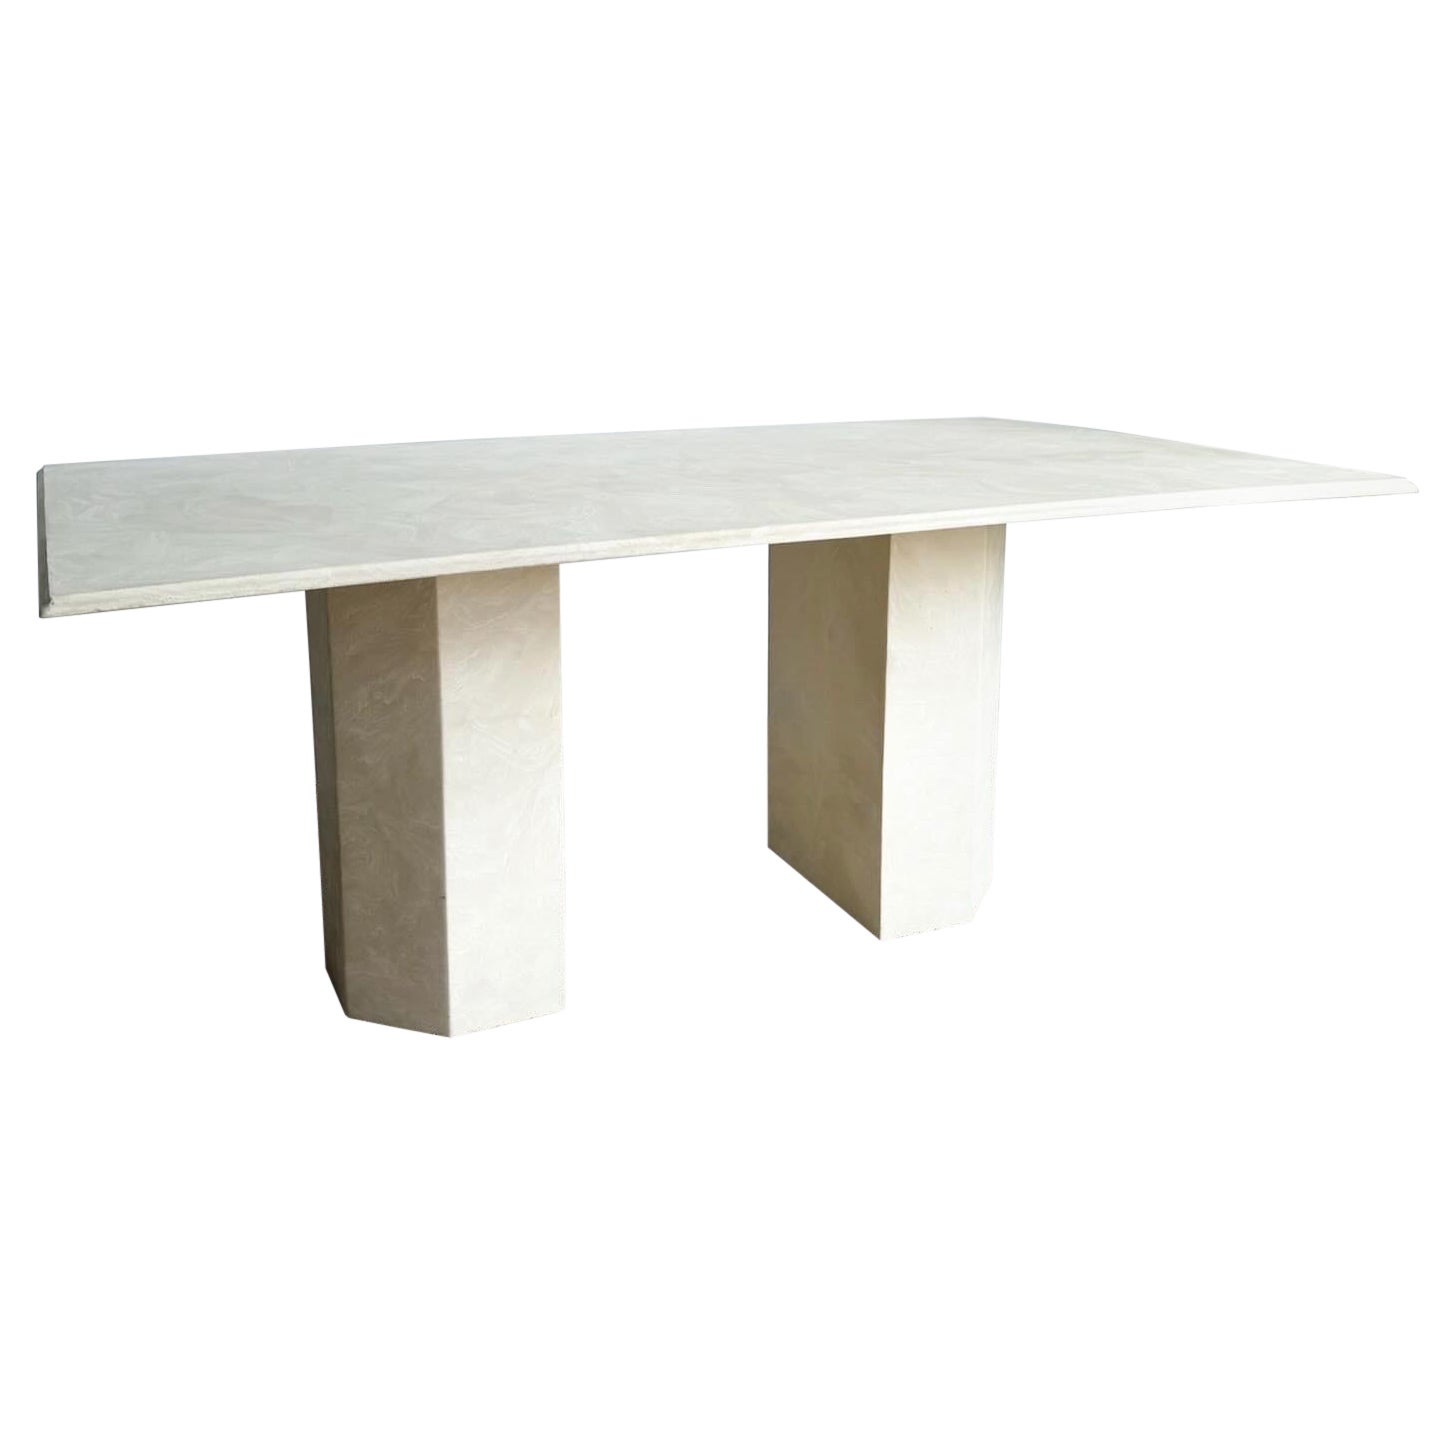 Postmodern Cast Faux Marble Cream and Beige Rectangular Dining Table For Sale